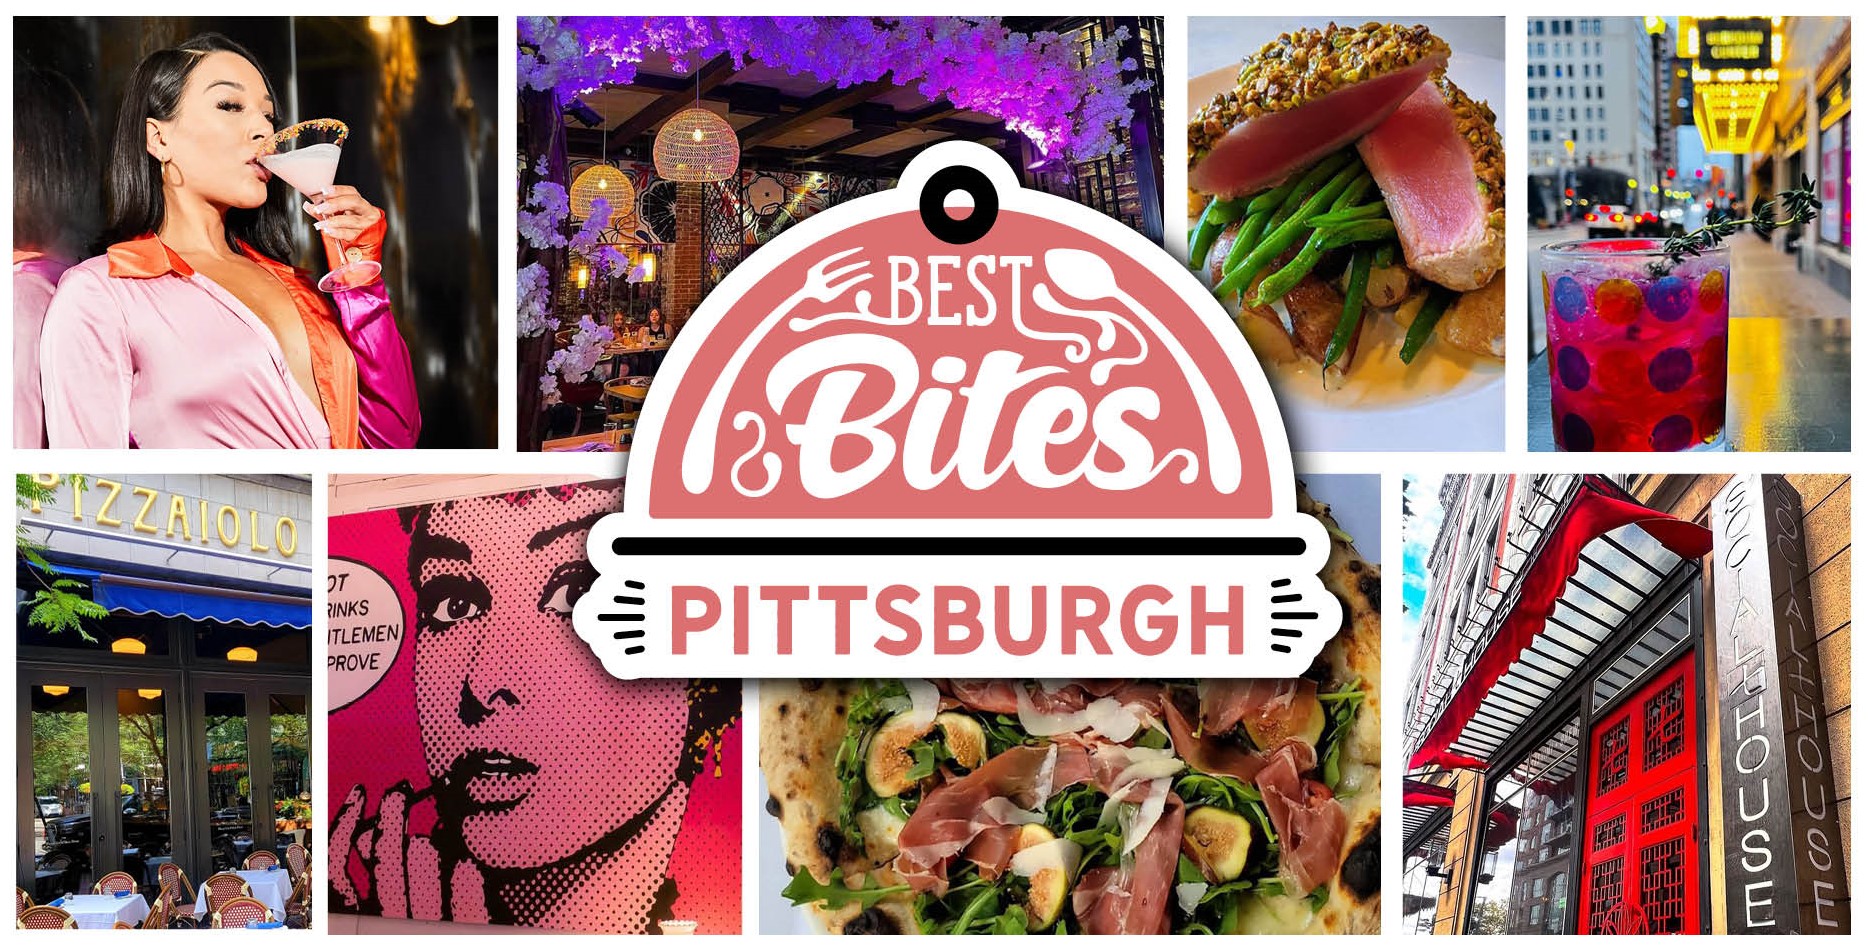 The Best Bites Pittsburgh logo on top of colorful photos of restaurants, drinks, and food.